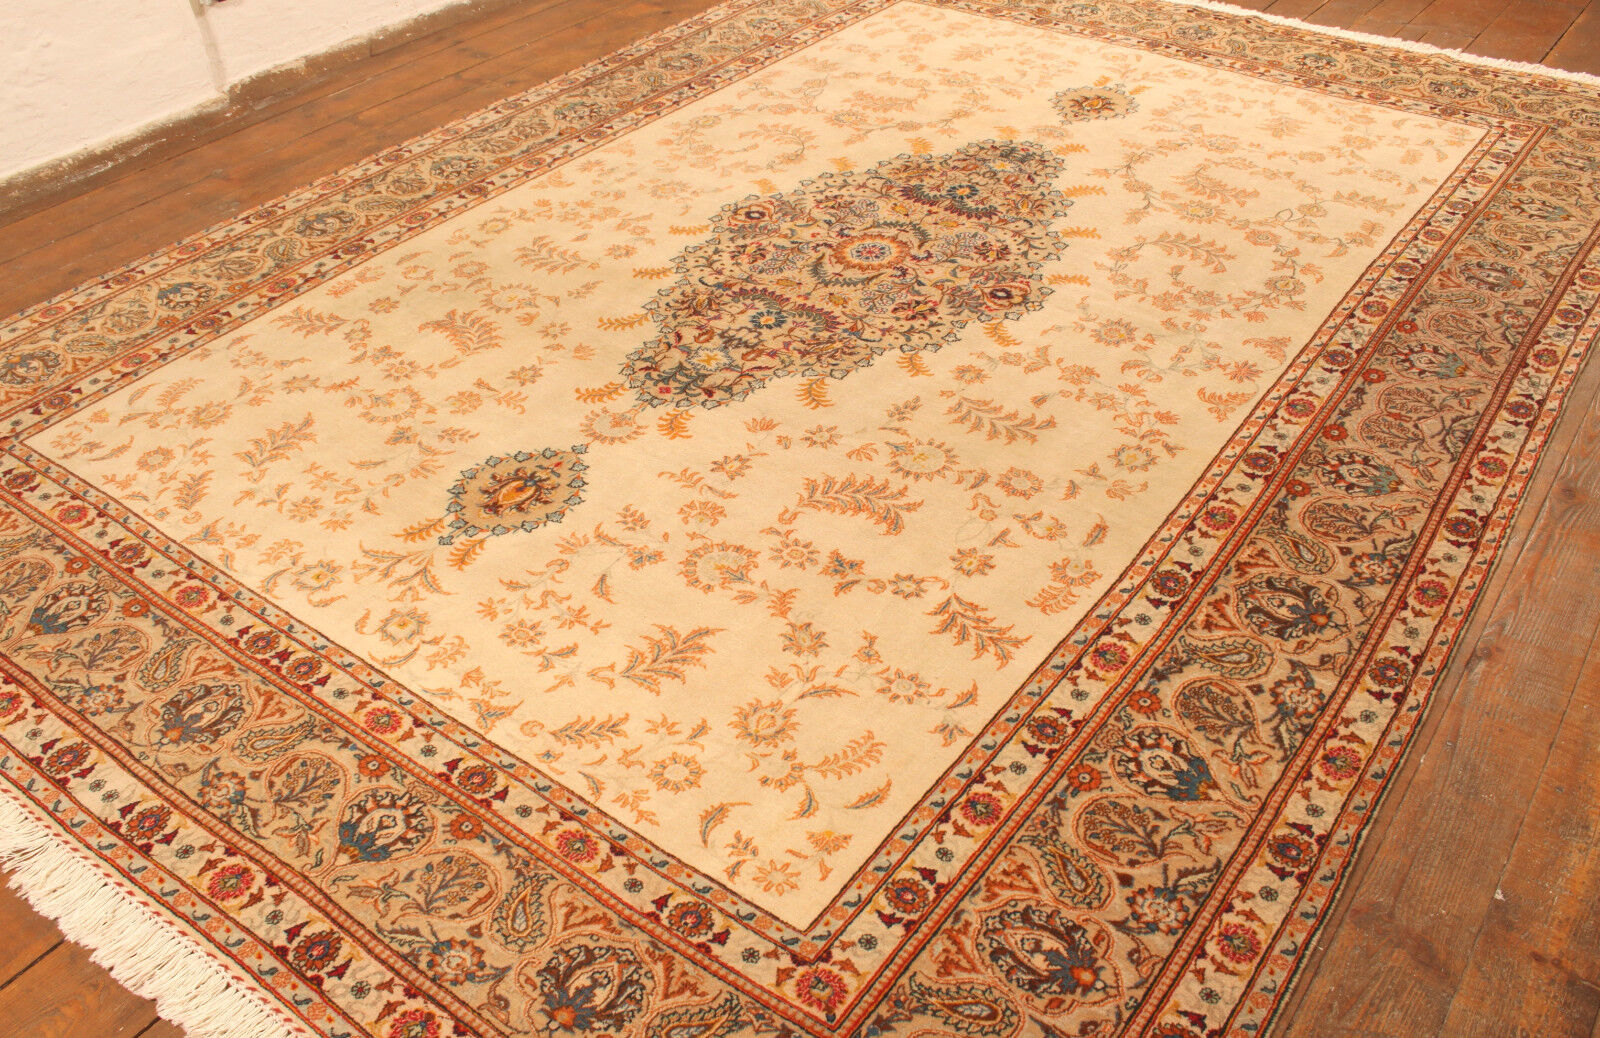 Close-up of the large medallion design on the Handmade Contemporary Persian Style Tabriz Rug